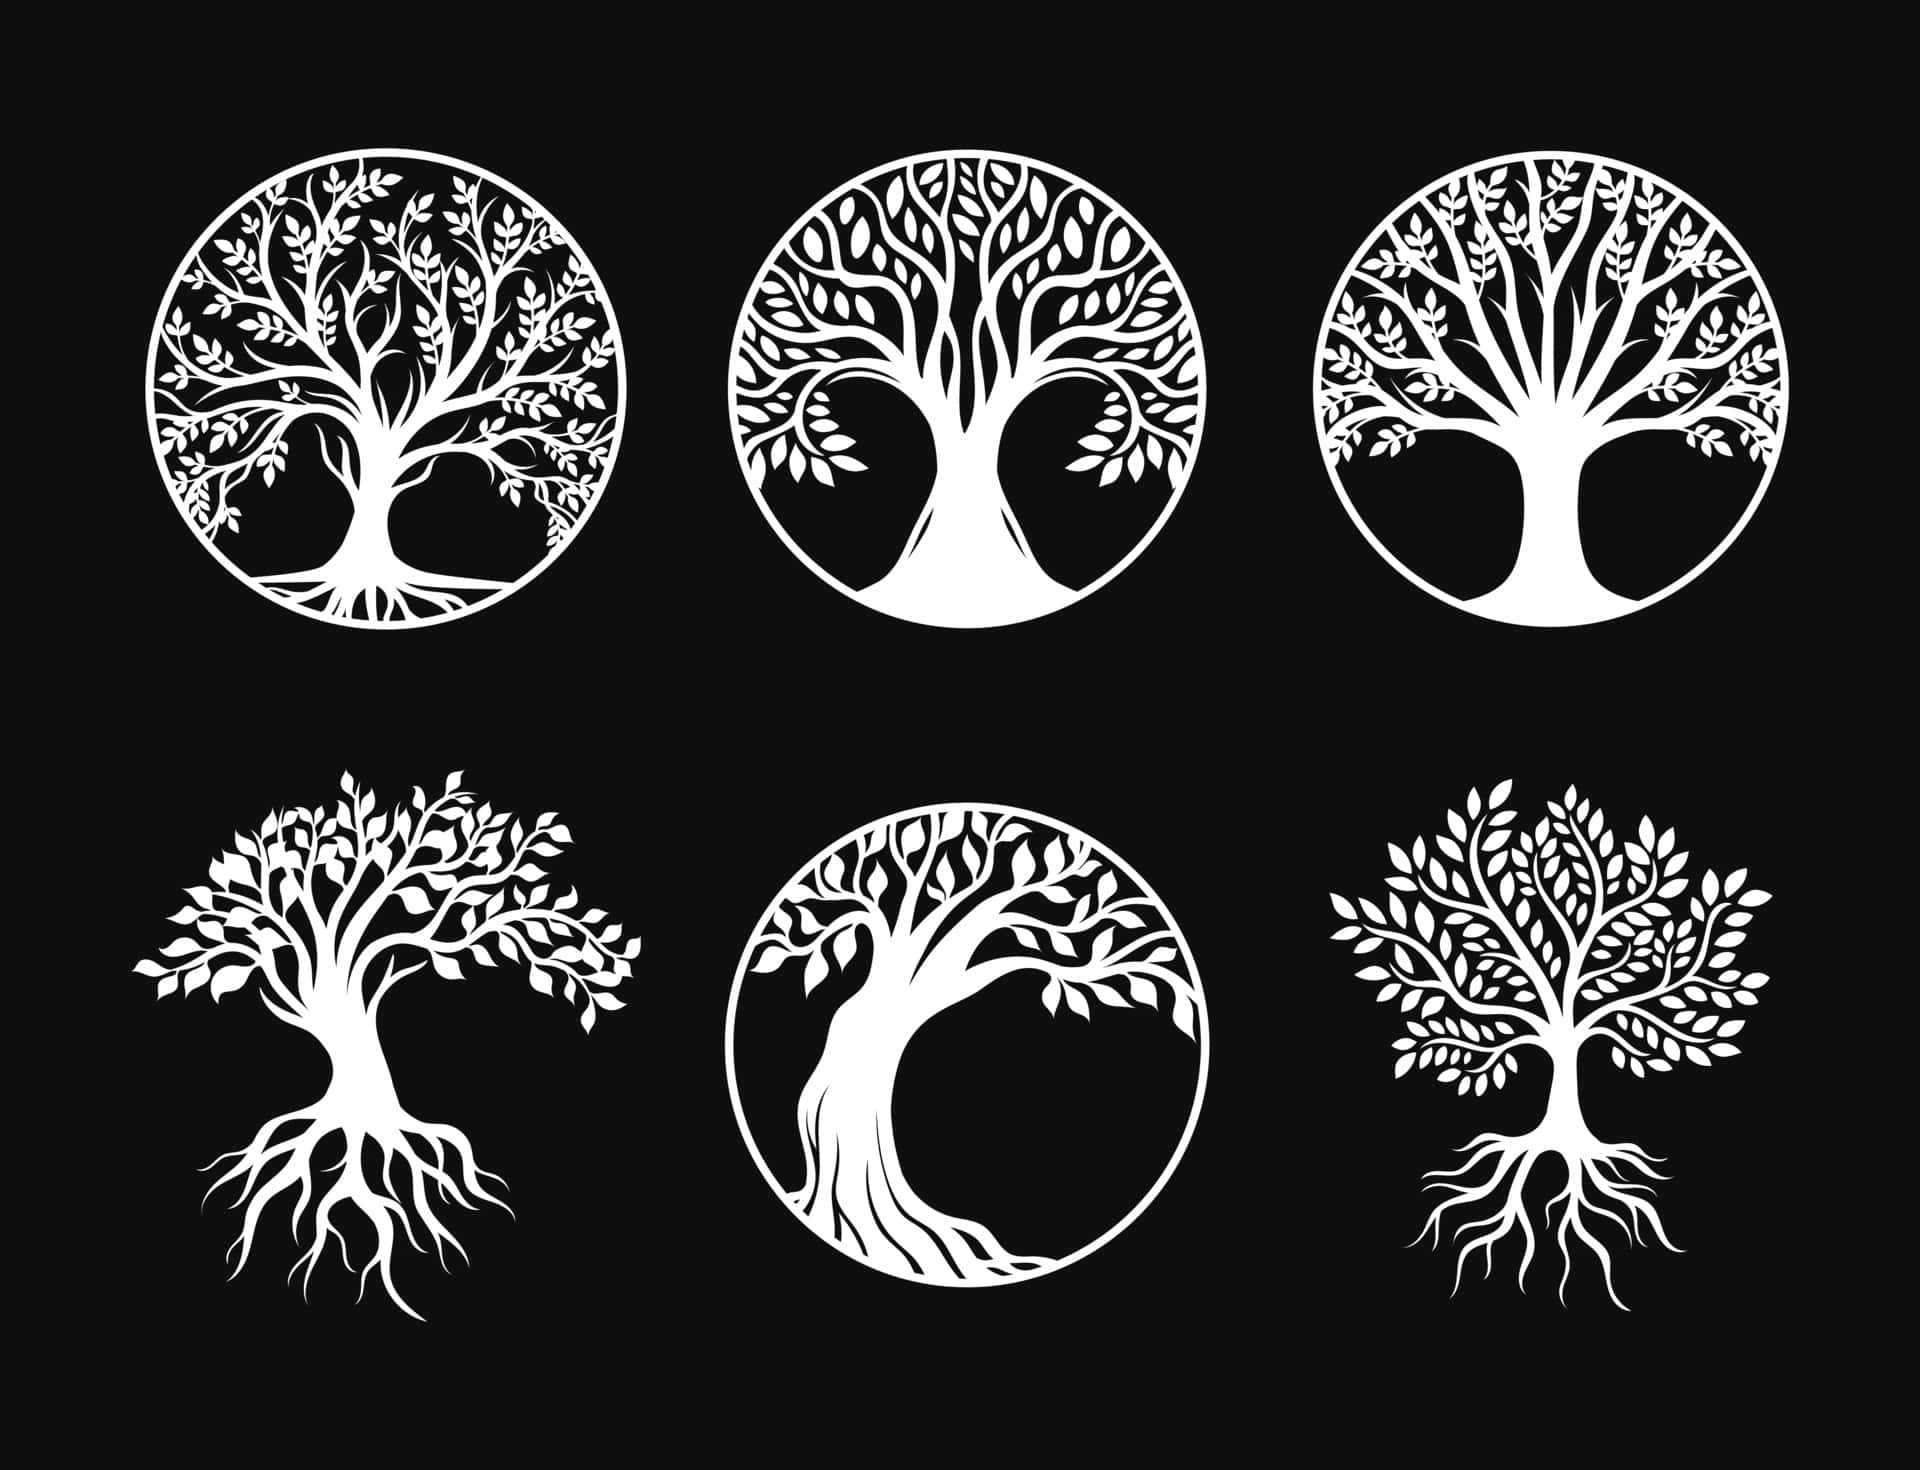 Download Magical Tree Of Life in Mystical Forest | Wallpapers.com